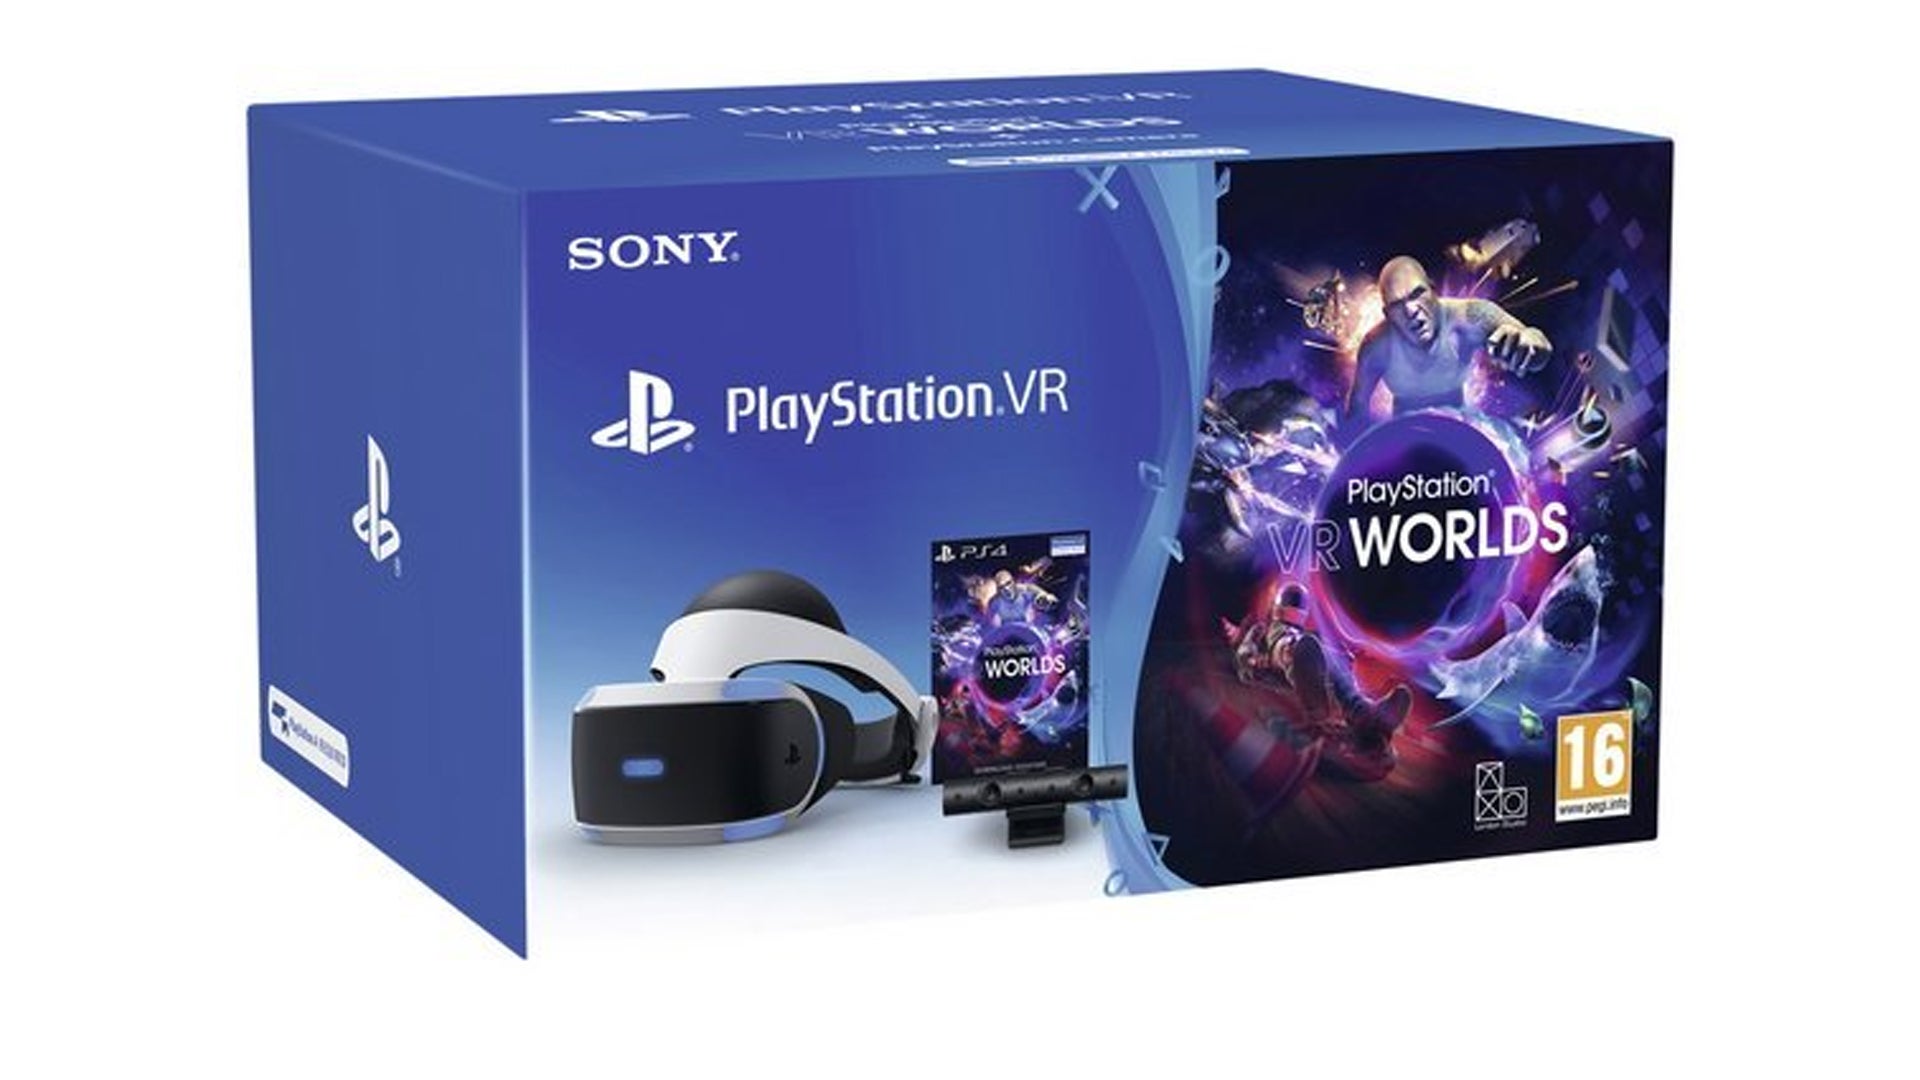 Get a PlayStation VR headset with Move controllers and a game for